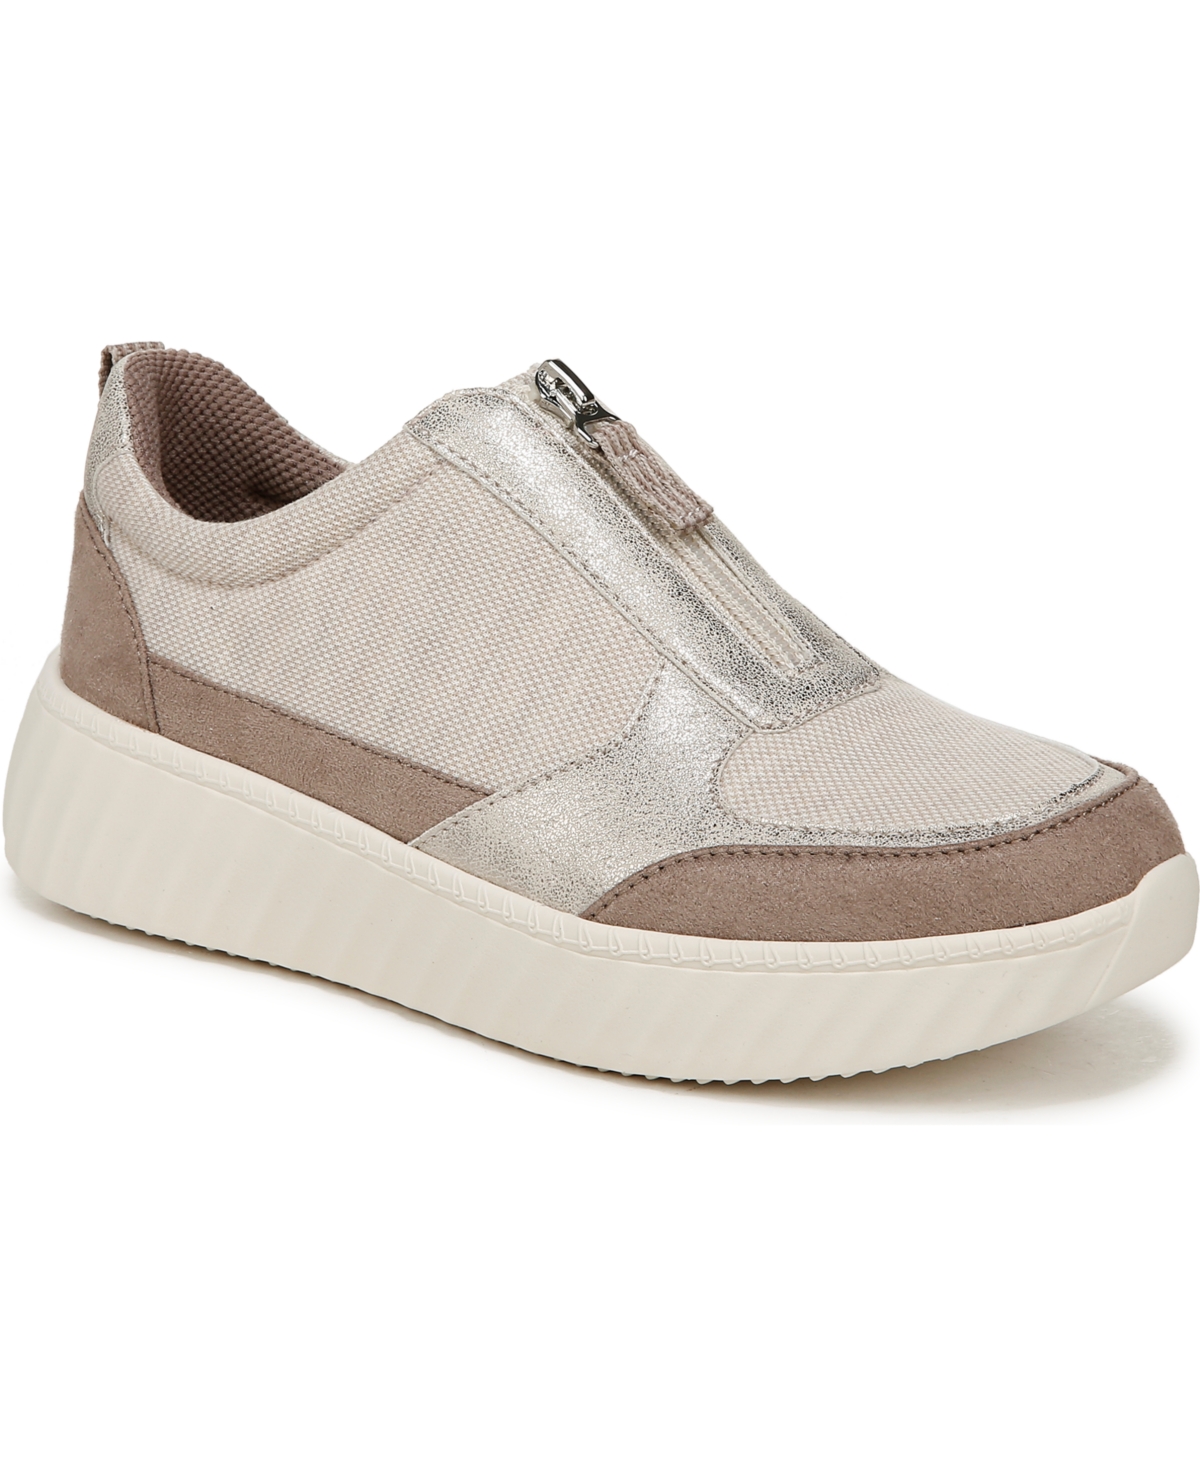 Bzees Winner Washable Zipper Sneakers In Taupe Textured Fabric